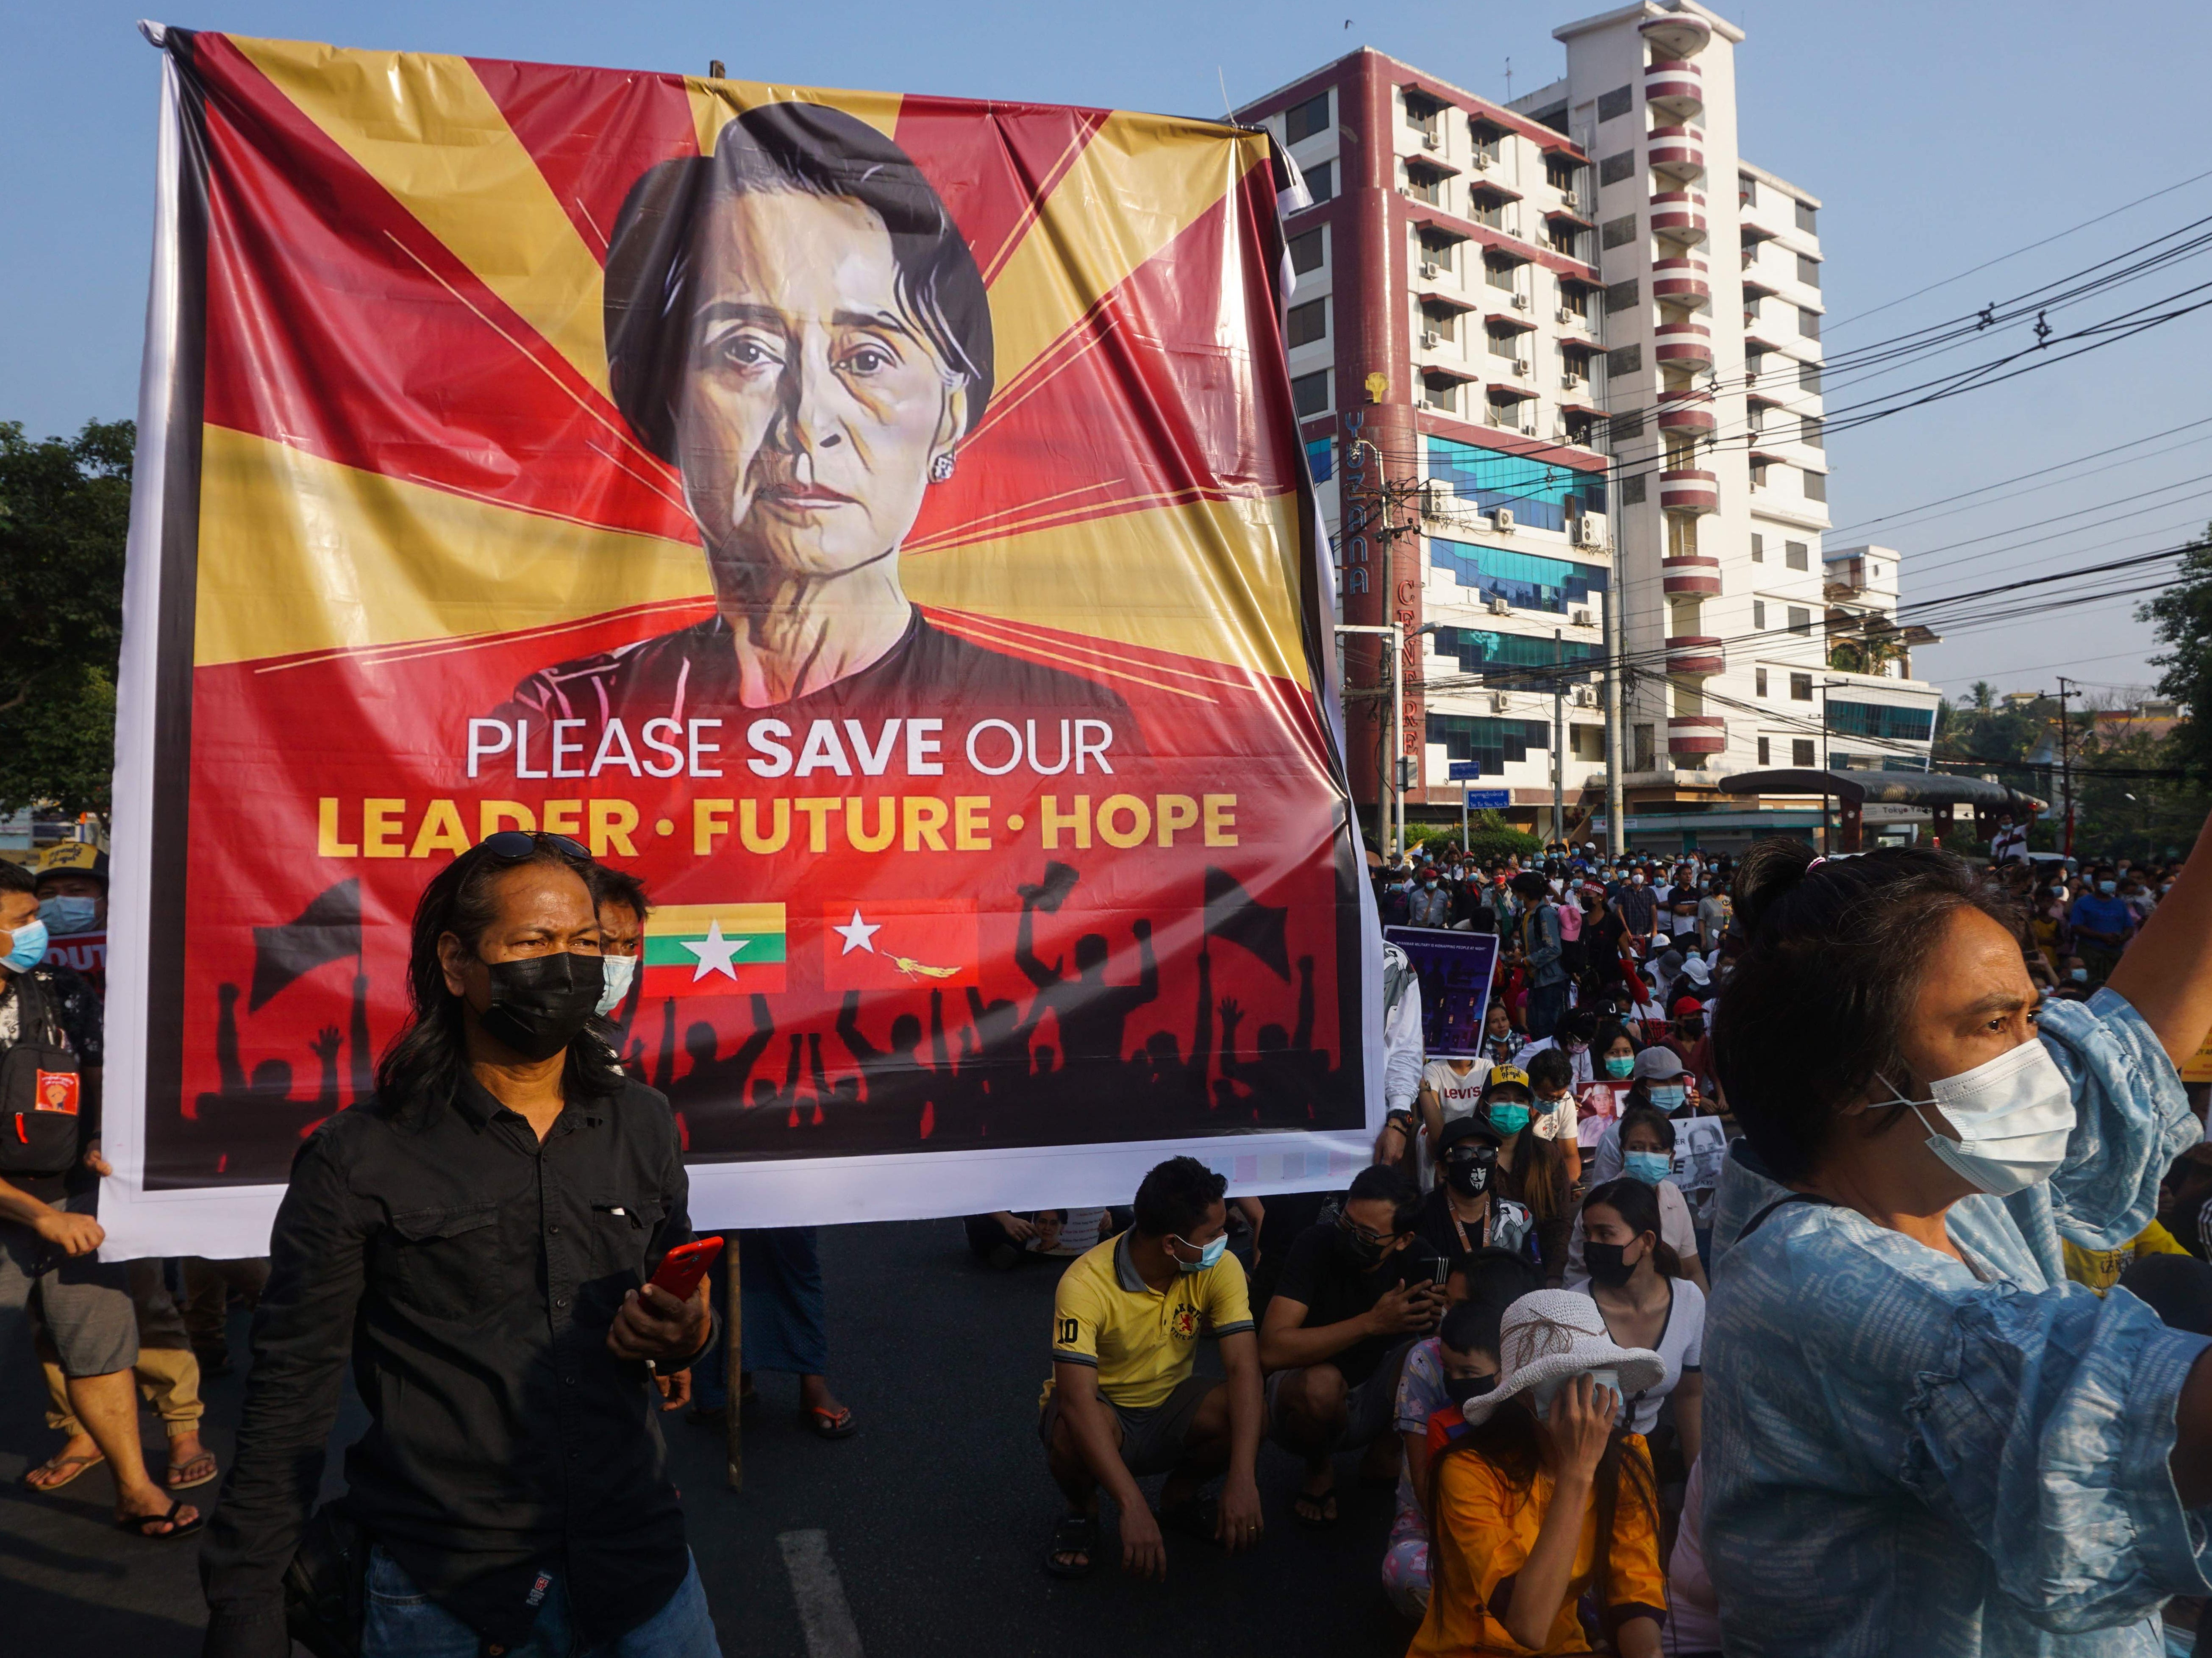 A banner featuring Aung San Suu Kyi is displayed as protesters take part in a demonstration against the military coup in front of the National League for Democracy (NLD) office in Yangon